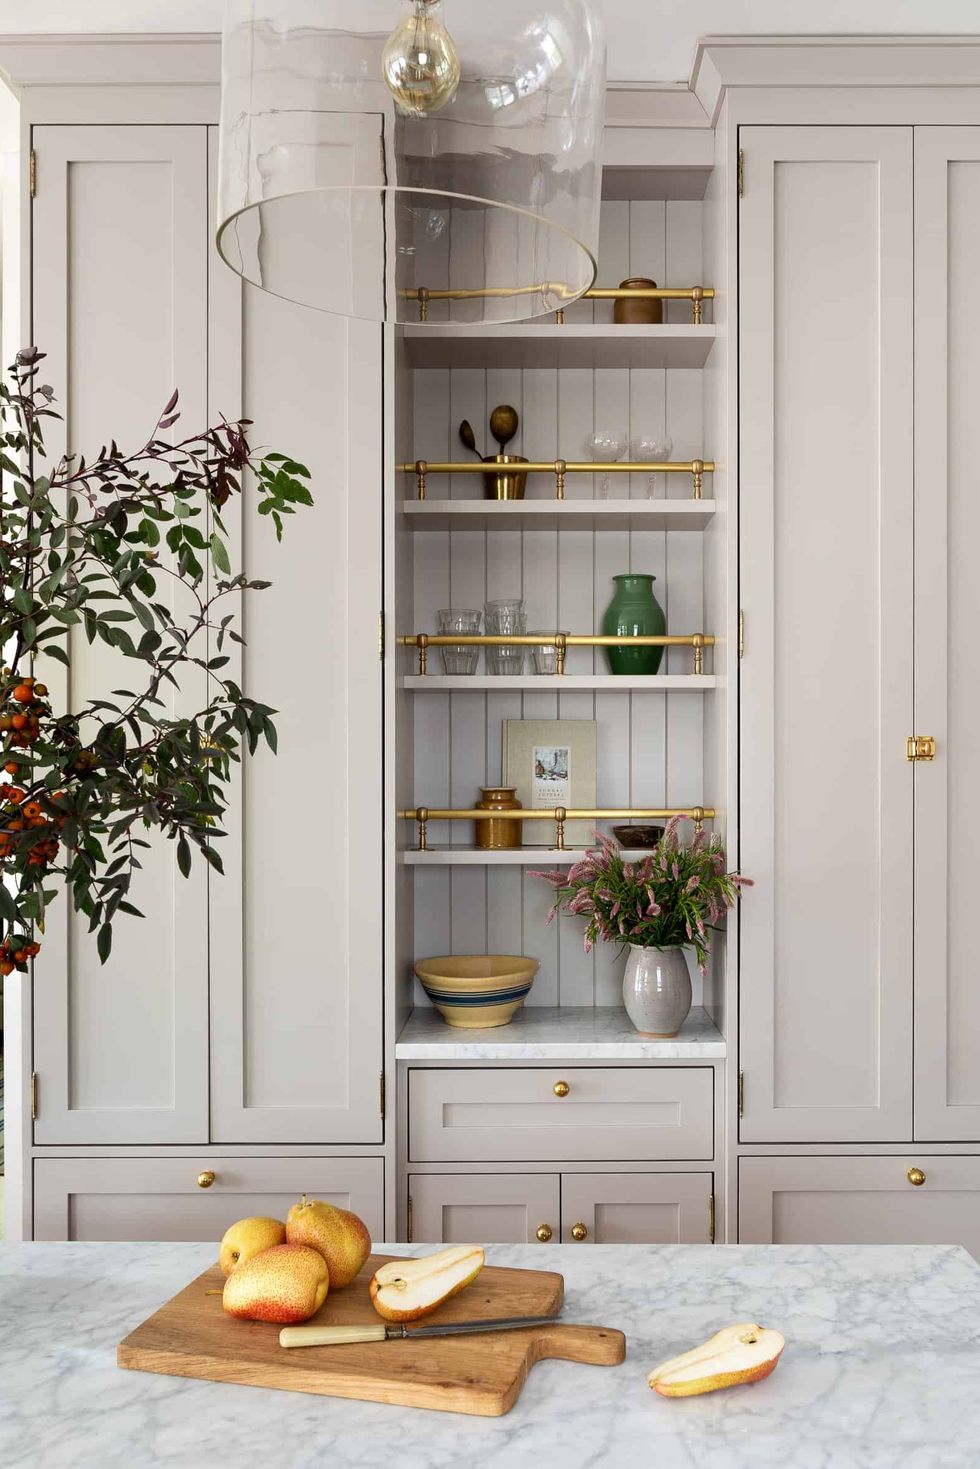 https://hips.hearstapps.com/hmg-prod/images/wall-storage-ideas-seattle-interior-designer-heidi-caillier-design-dining-room-phinney-ridge-craftsman-home-design-kitchen-inset-shaker-cabinets-bauman-chairs-small-island-industrial-pendant-light-1642194868.jpg?crop=0.879xw:1.00xh;0.0748xw,0&resize=980:*